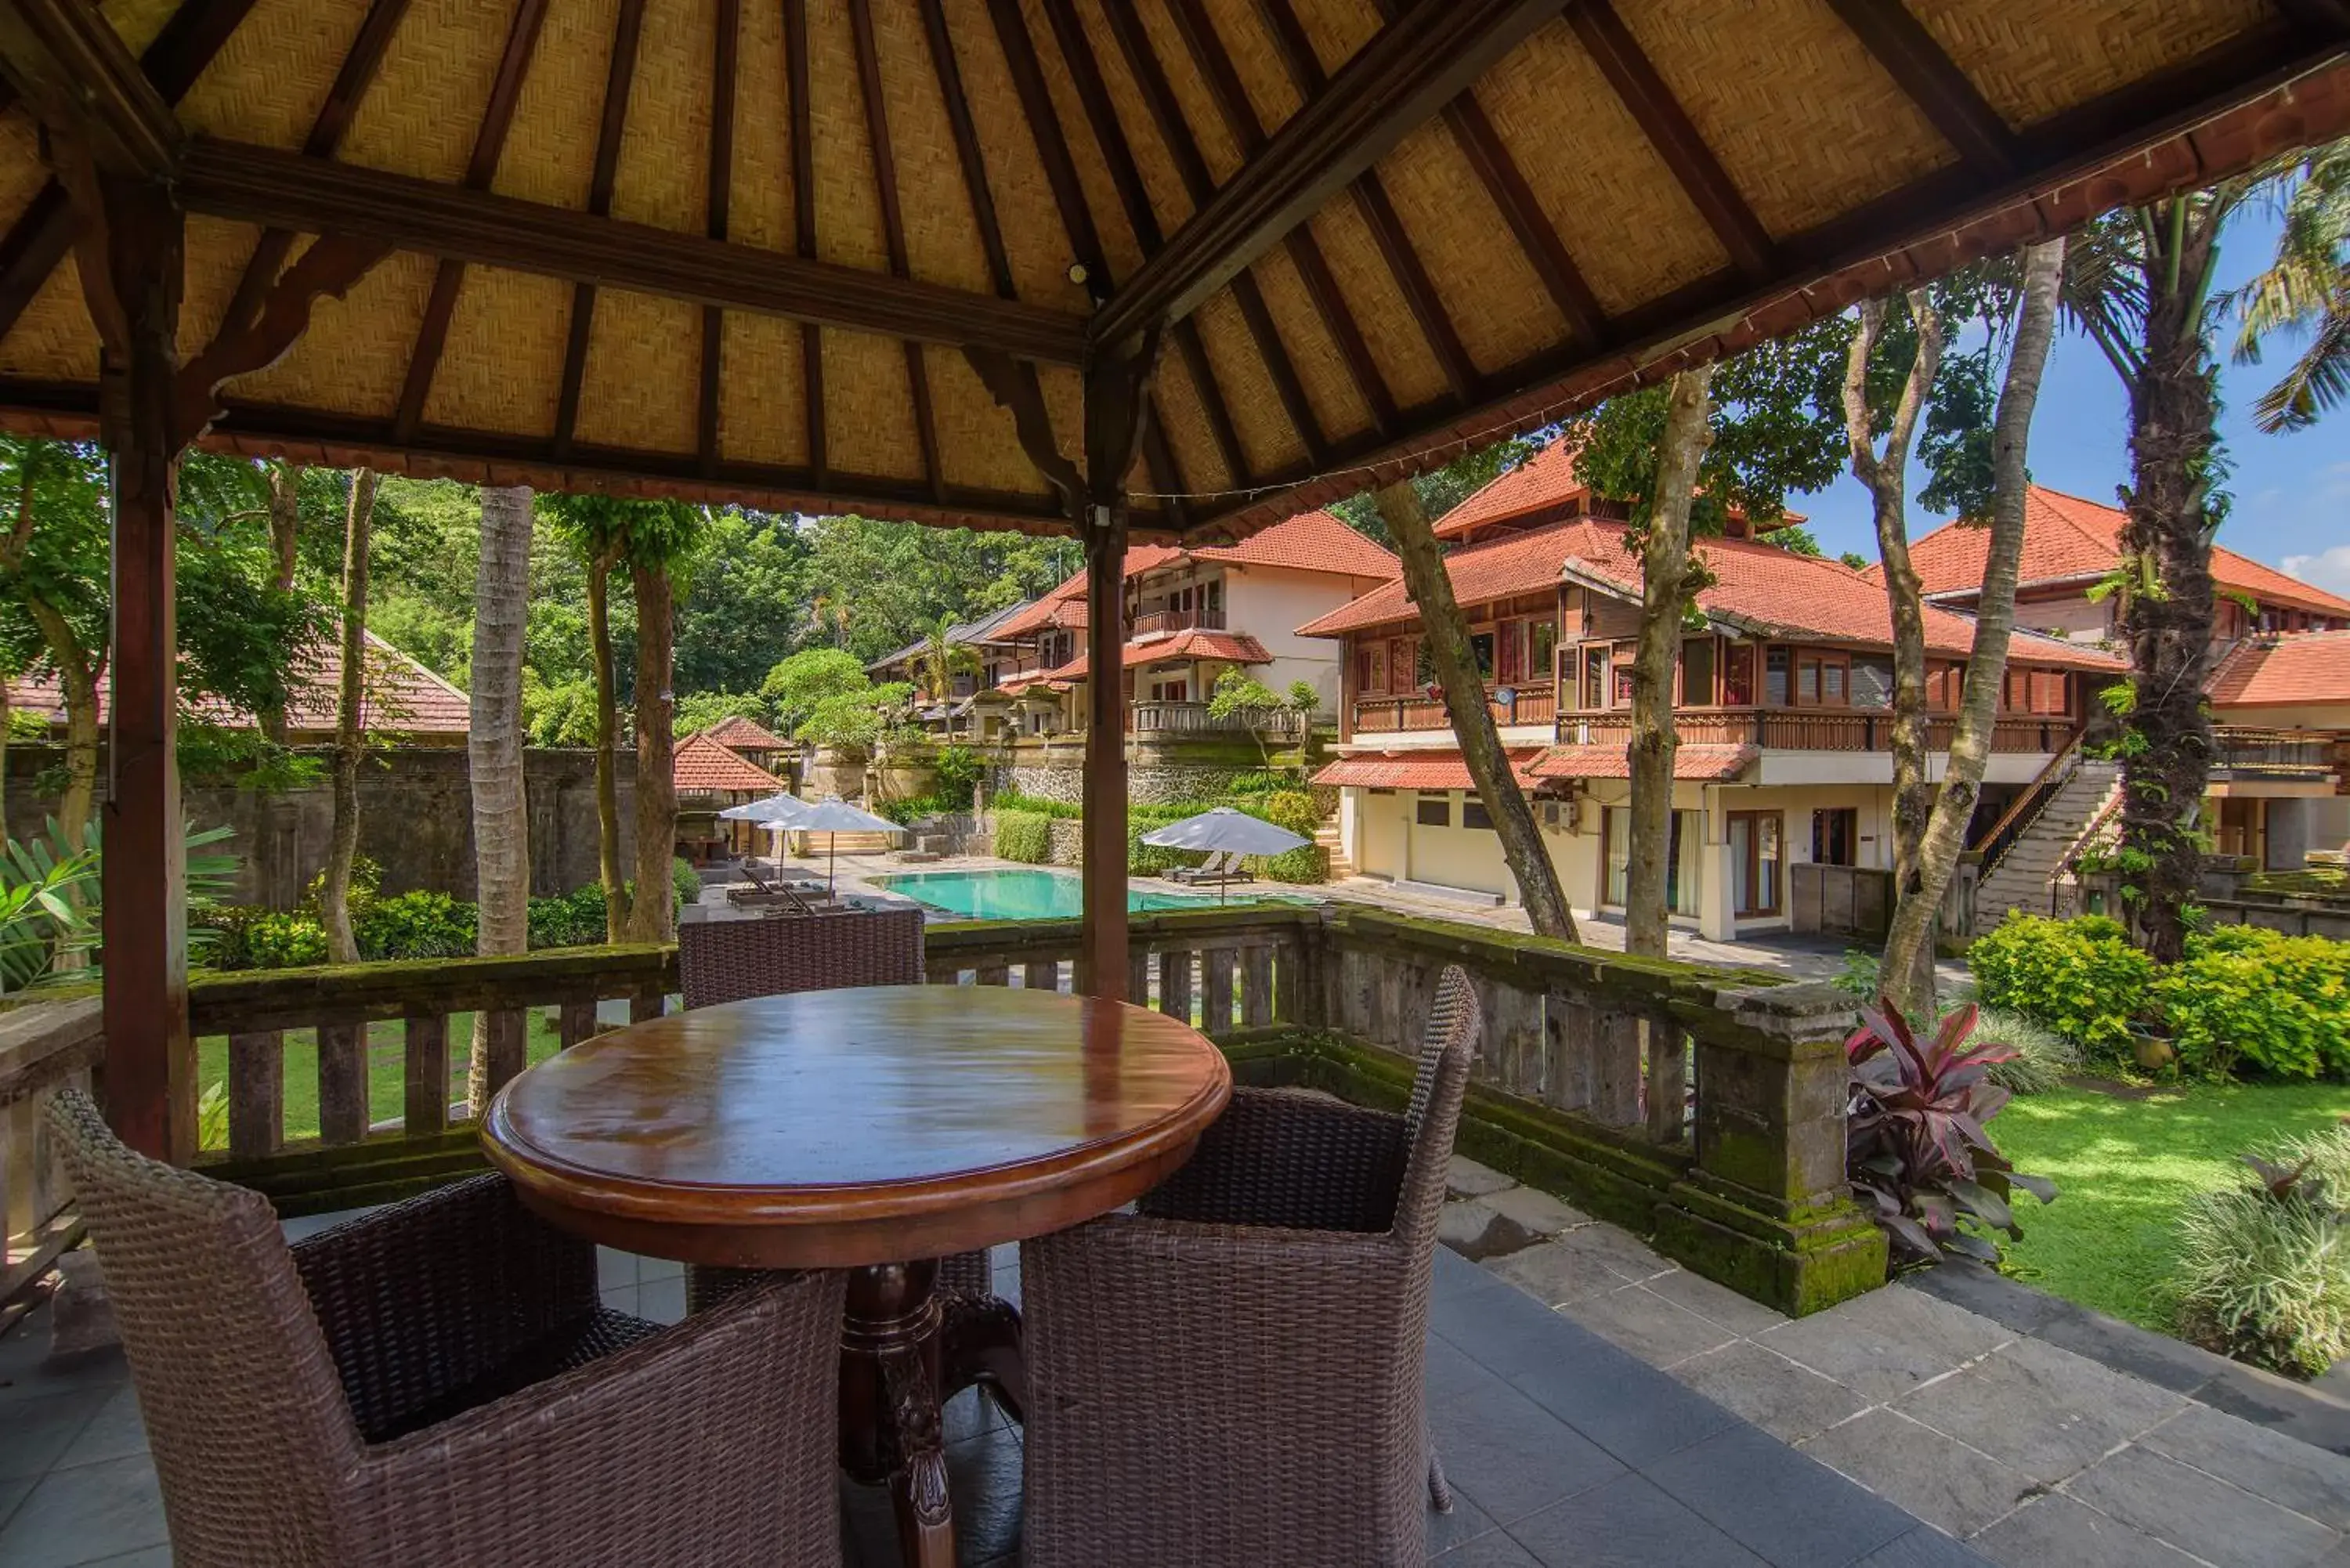 Area and facilities in Champlung Sari Hotel and Spa Ubud